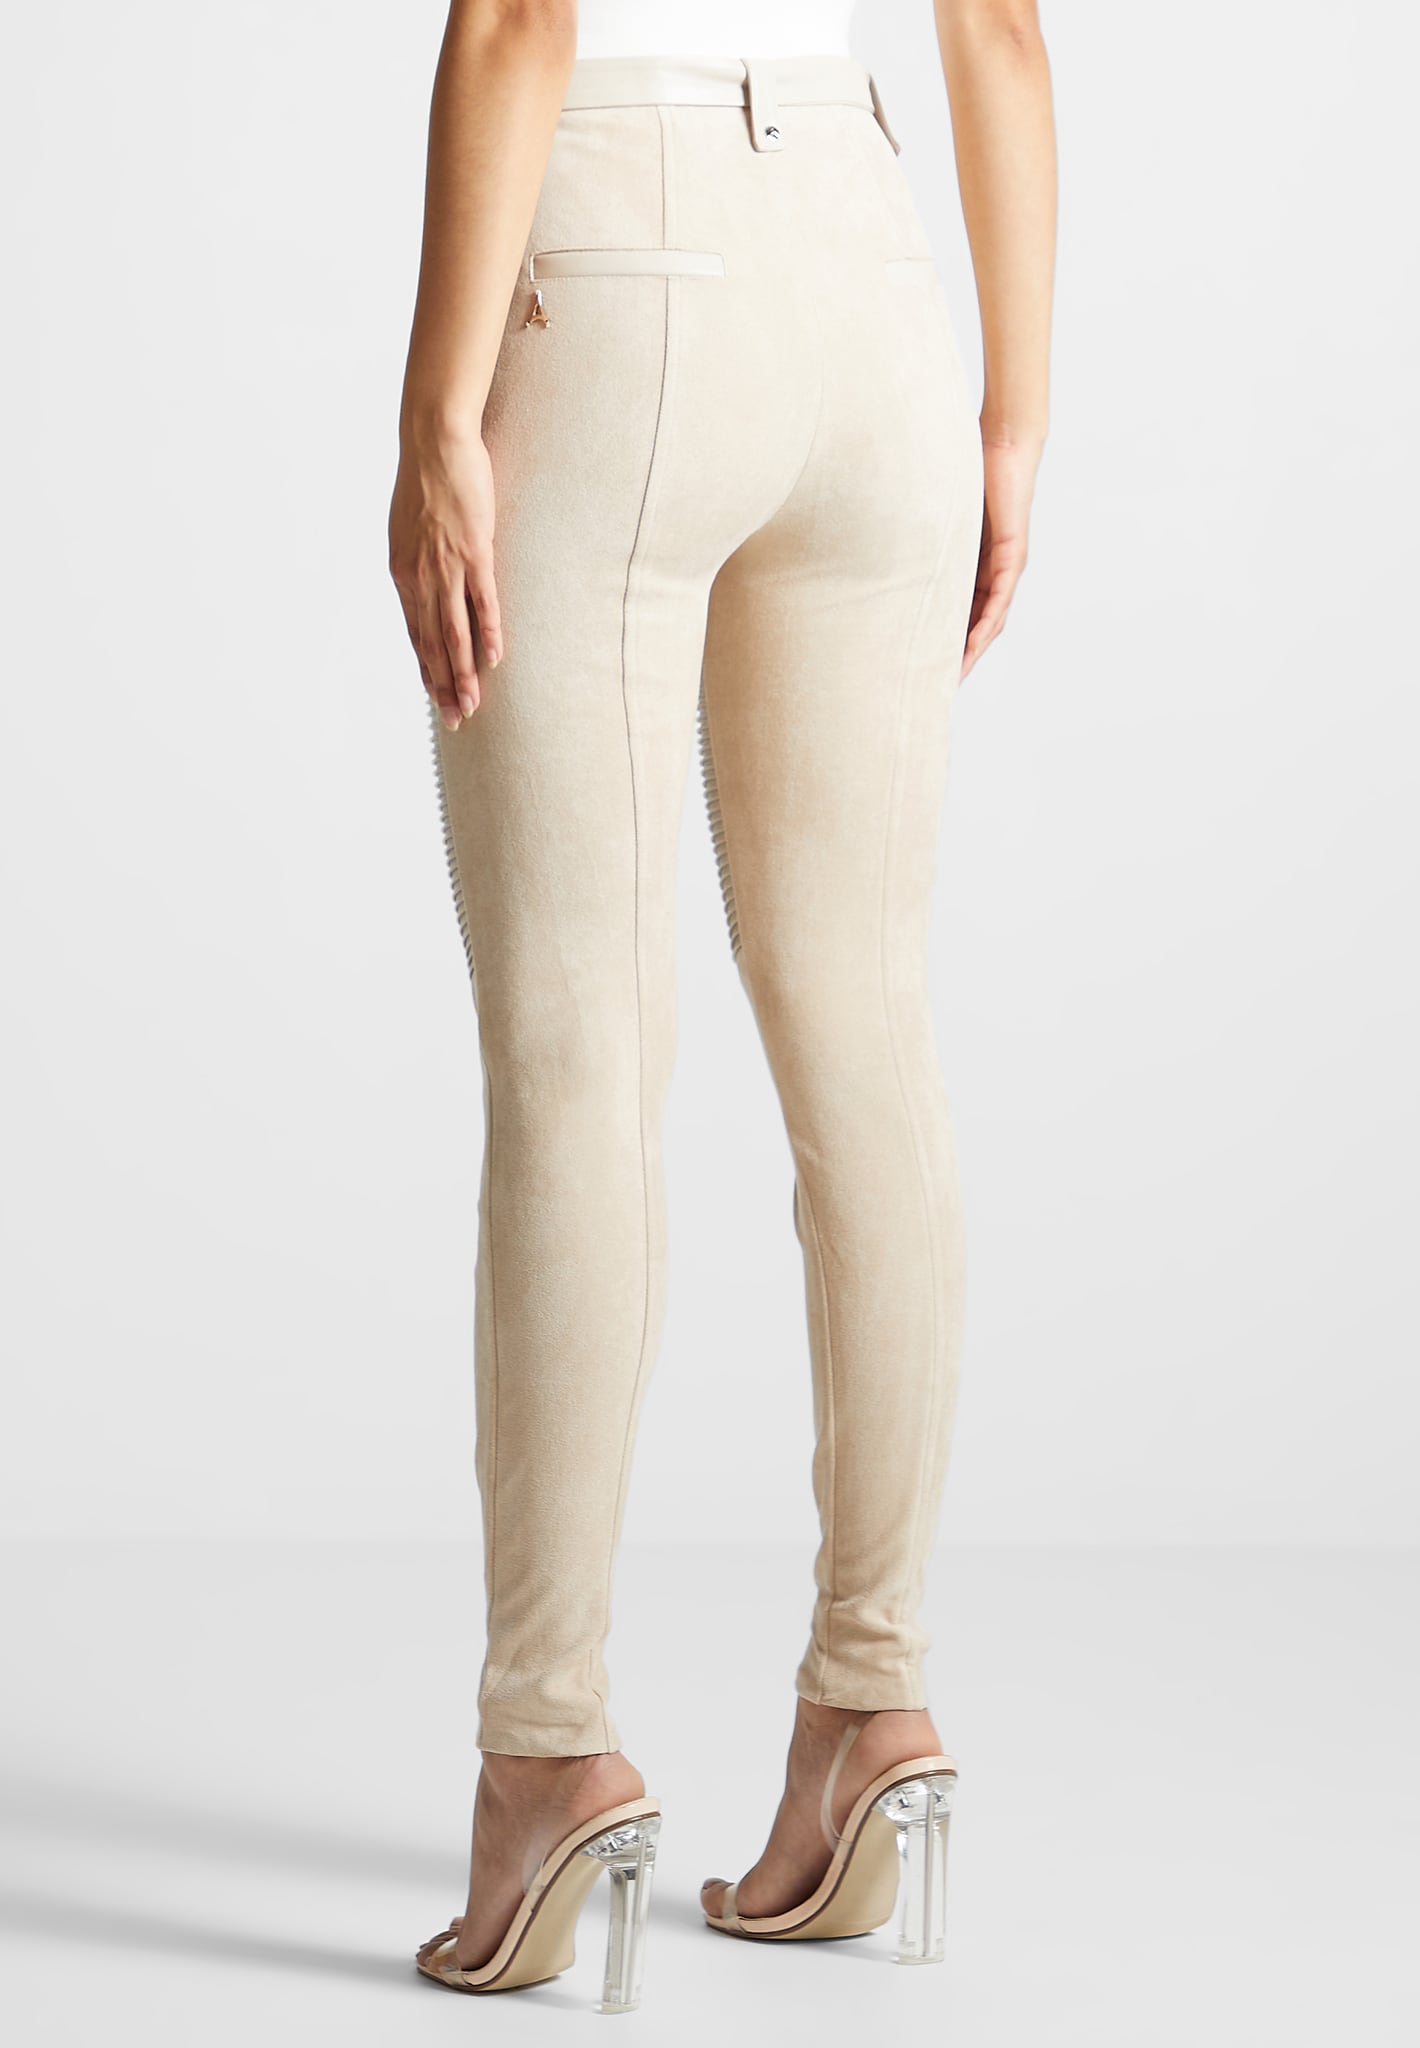 Vegan Leather and Suede Ribbed Leggings - Beige